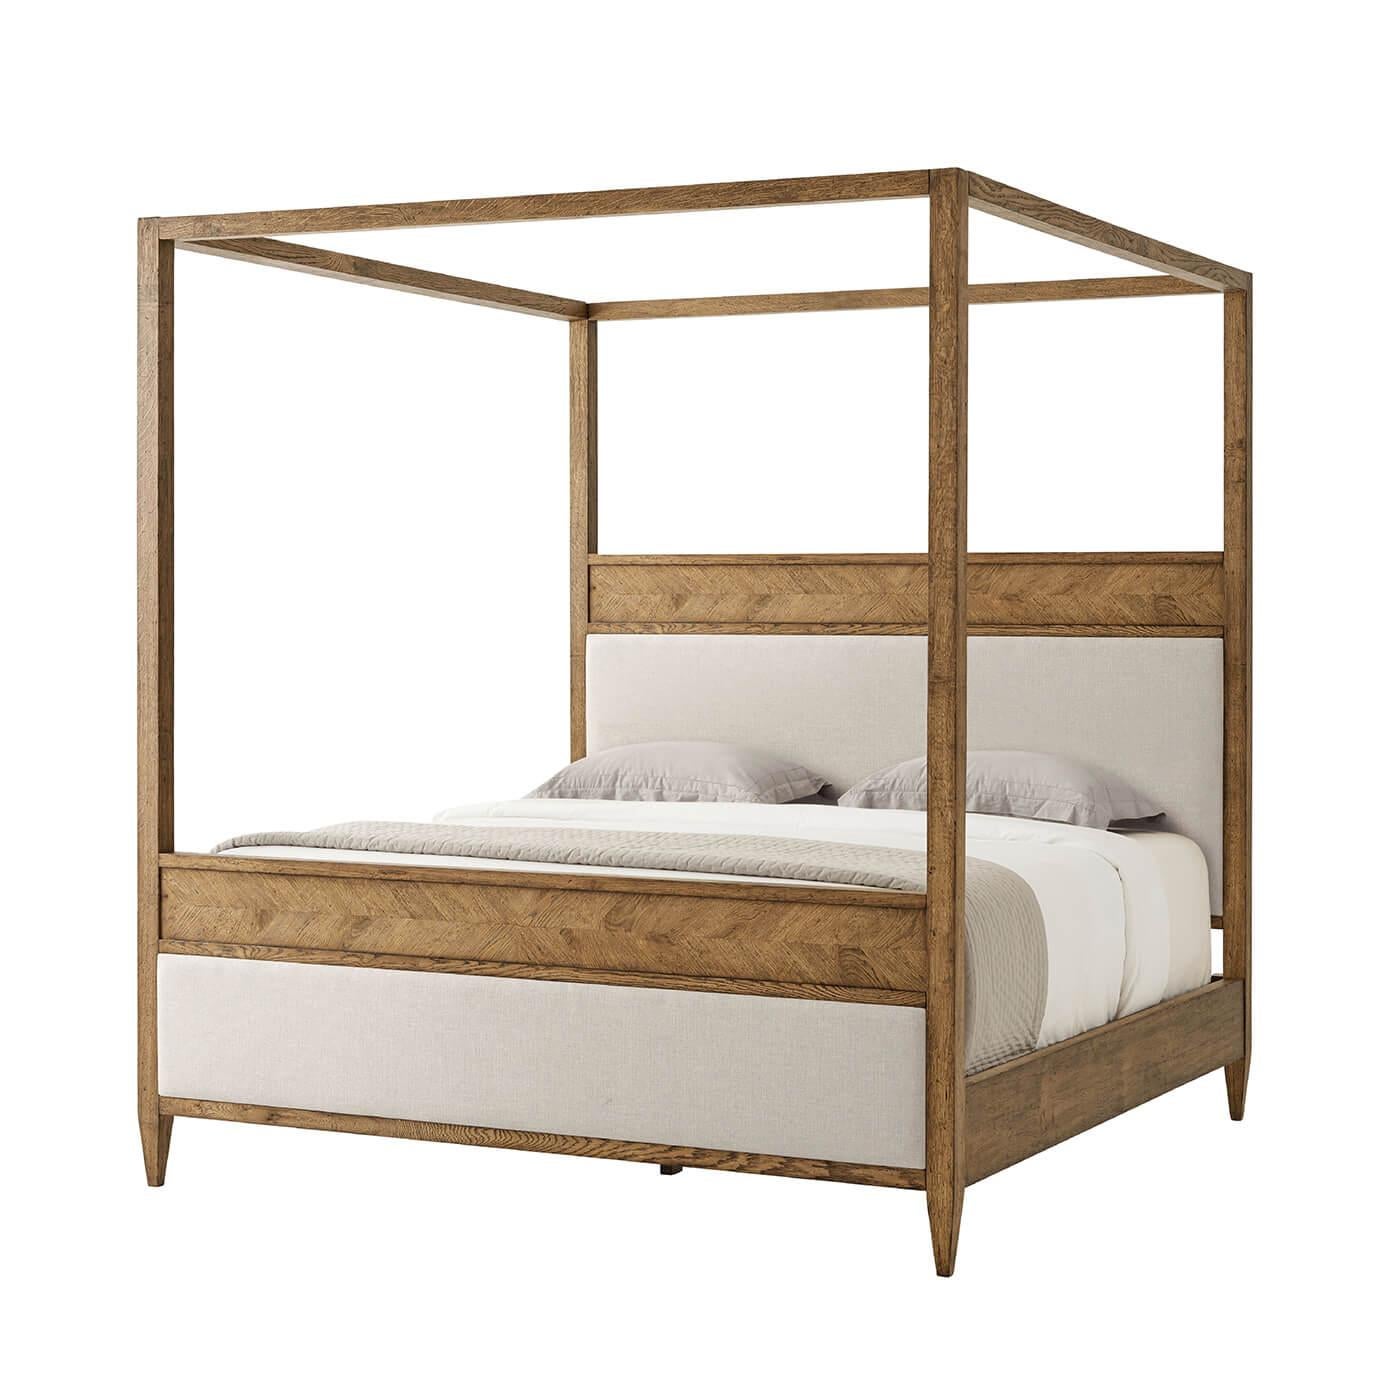 A rustic oak canopy bed in Dawn finish. This beautiful bed has hand-carved oak solids and mirrored herringbone marquetry with an upholstered panel on the headboard and footboard. It rests on finely tapered oak legs. 
Shown in dawn finish
Shown in